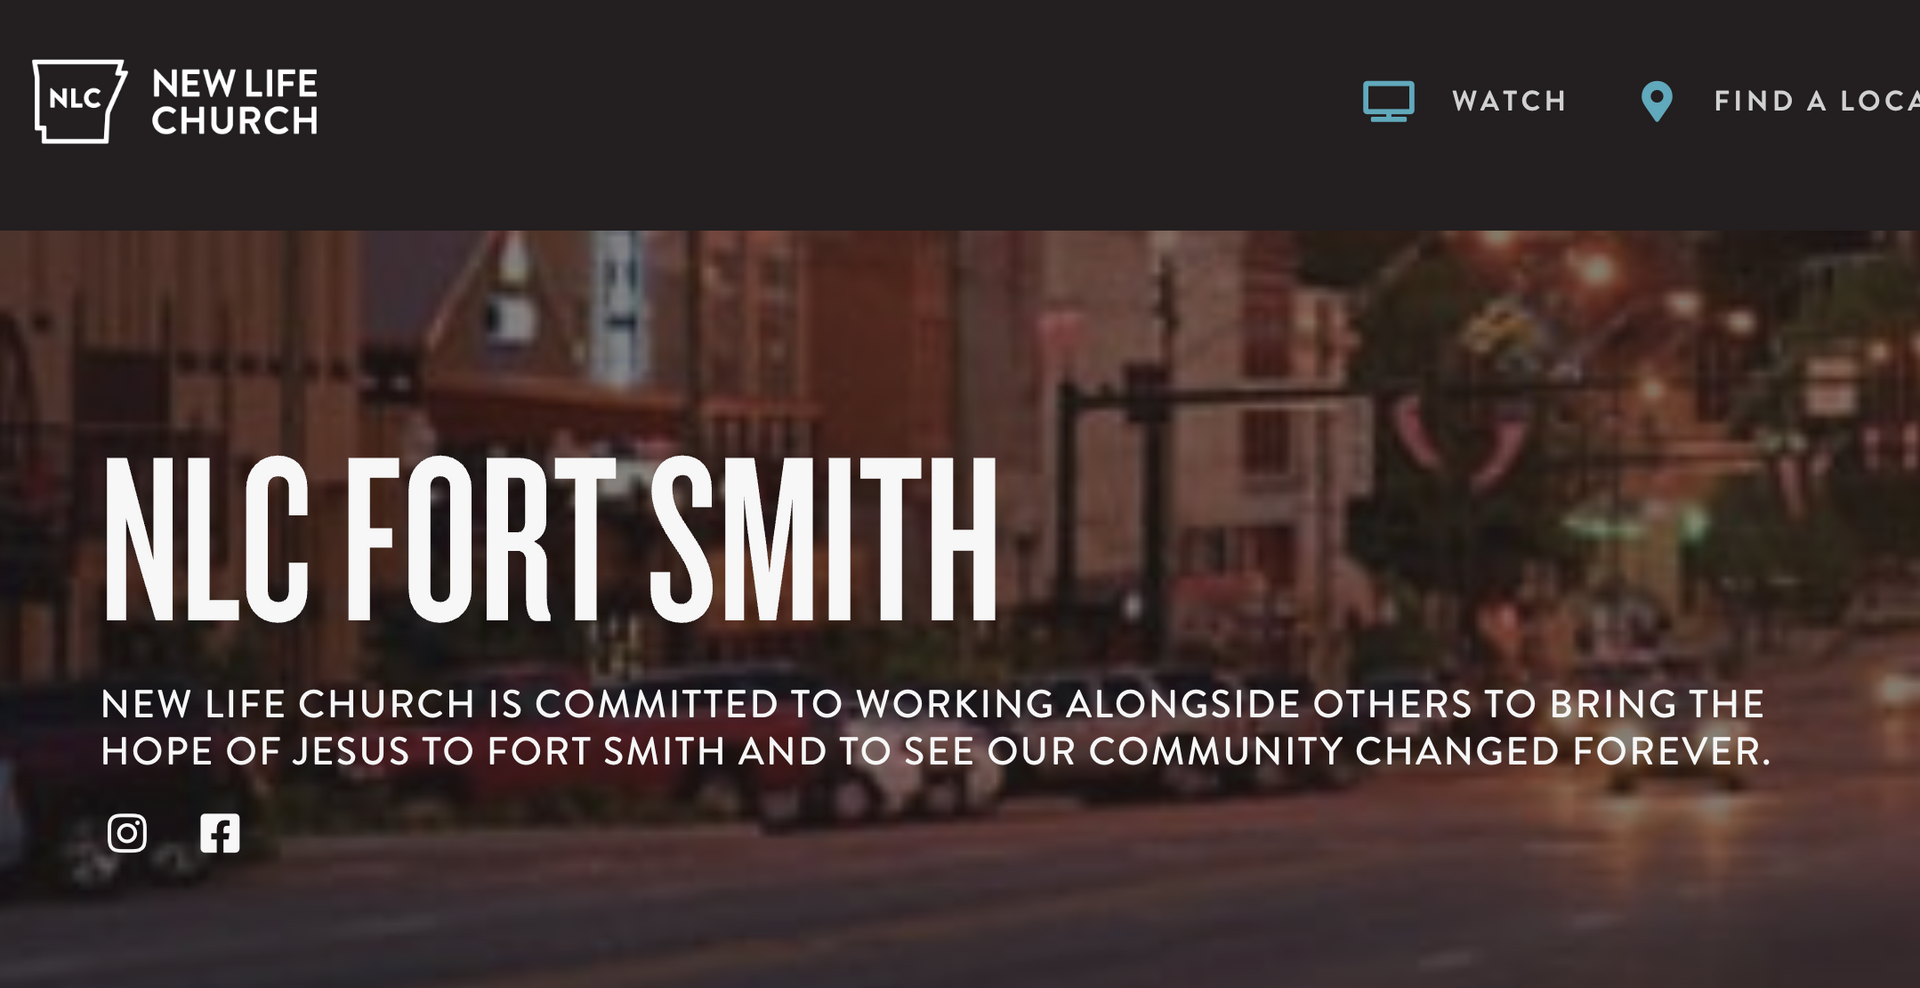 A website for nlc fort smith is shown